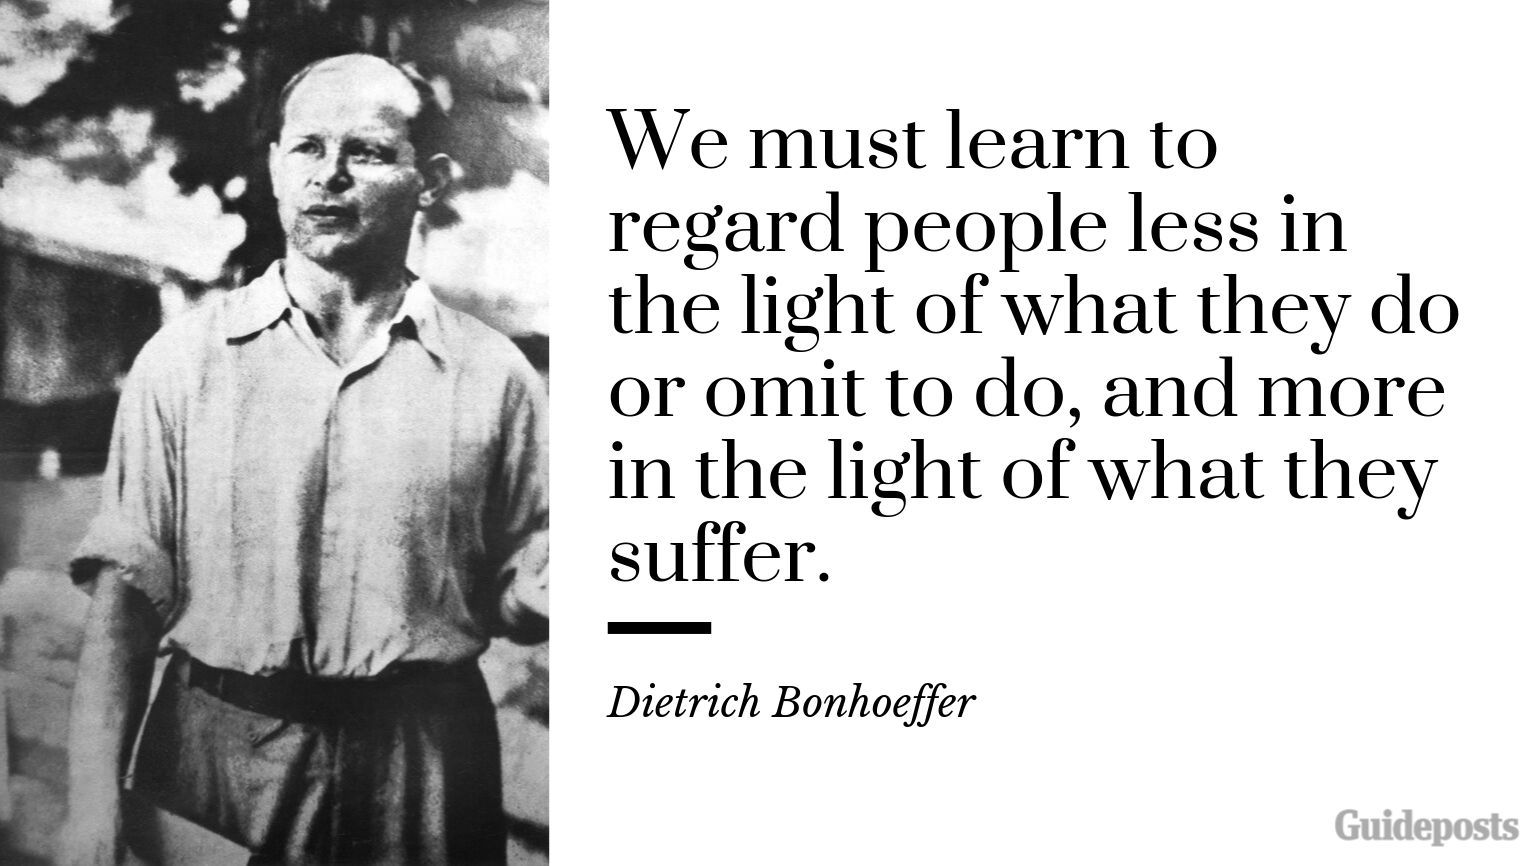 7 Inspiring Quotes from Dietrich Bonhoeffer German Pastor "We must learn to regard people less in the light of what they do or omit to do, and more in the light of what they suffer.